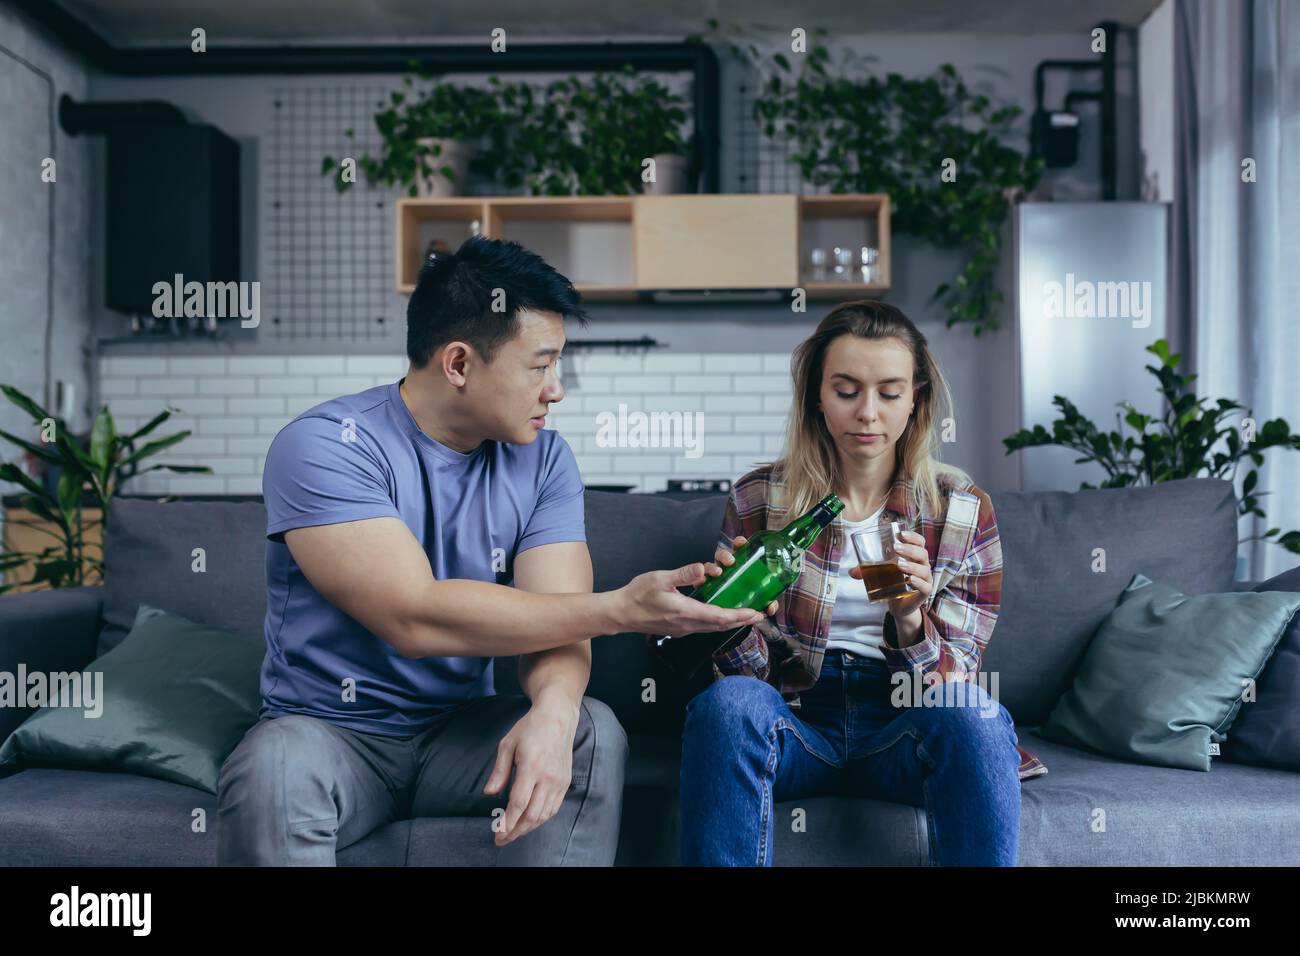 Alcoholic woman drinking hard alcohol at home, husband frustrated and annoyed, conflict in young family over alcohol Stock Photo